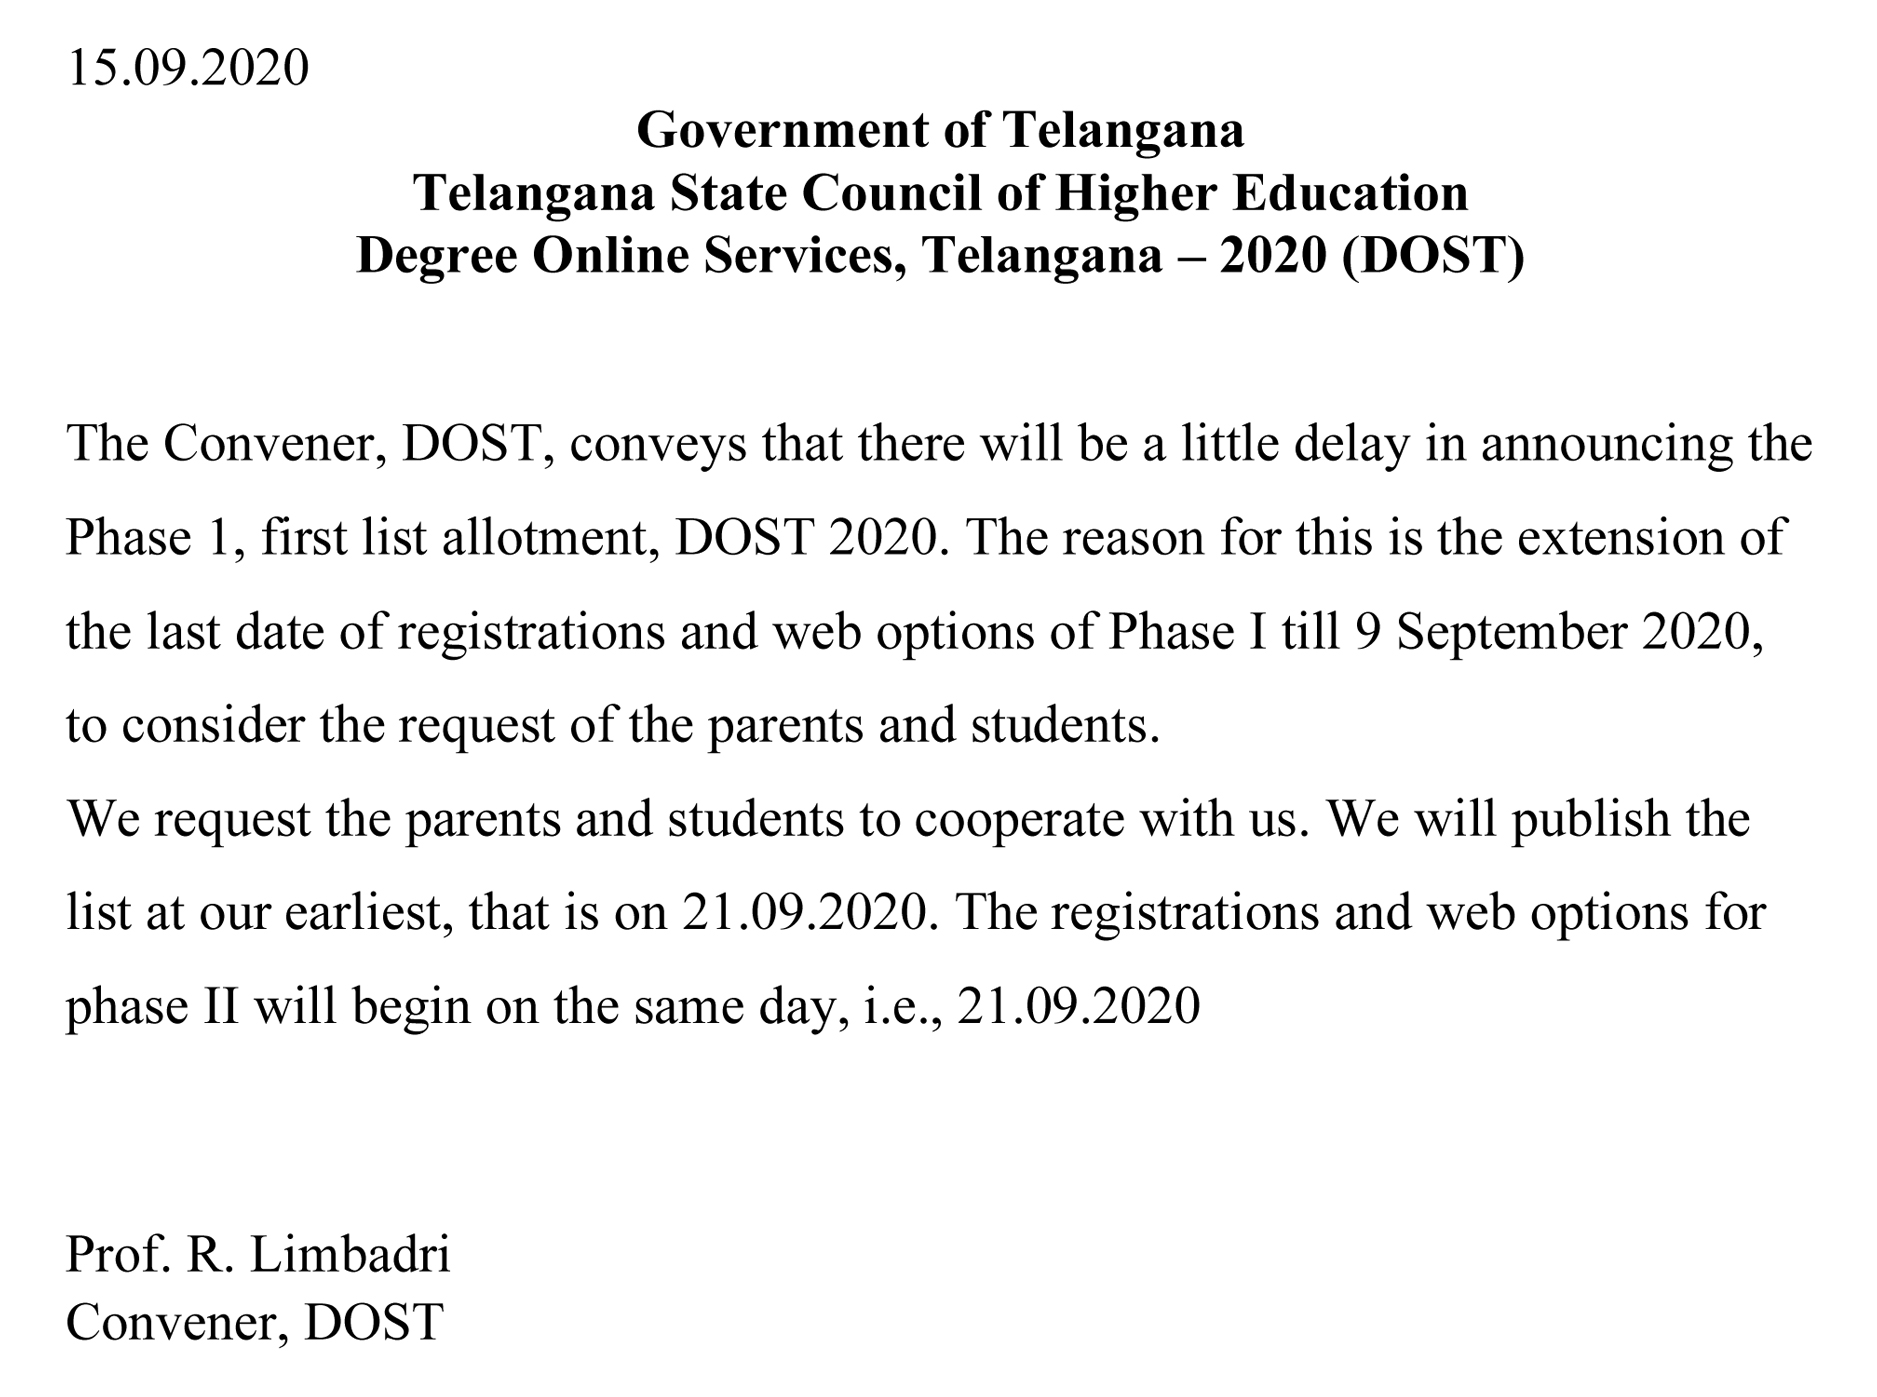 DOST Phase 1 Last Date Registration & Web Option Extended Notification